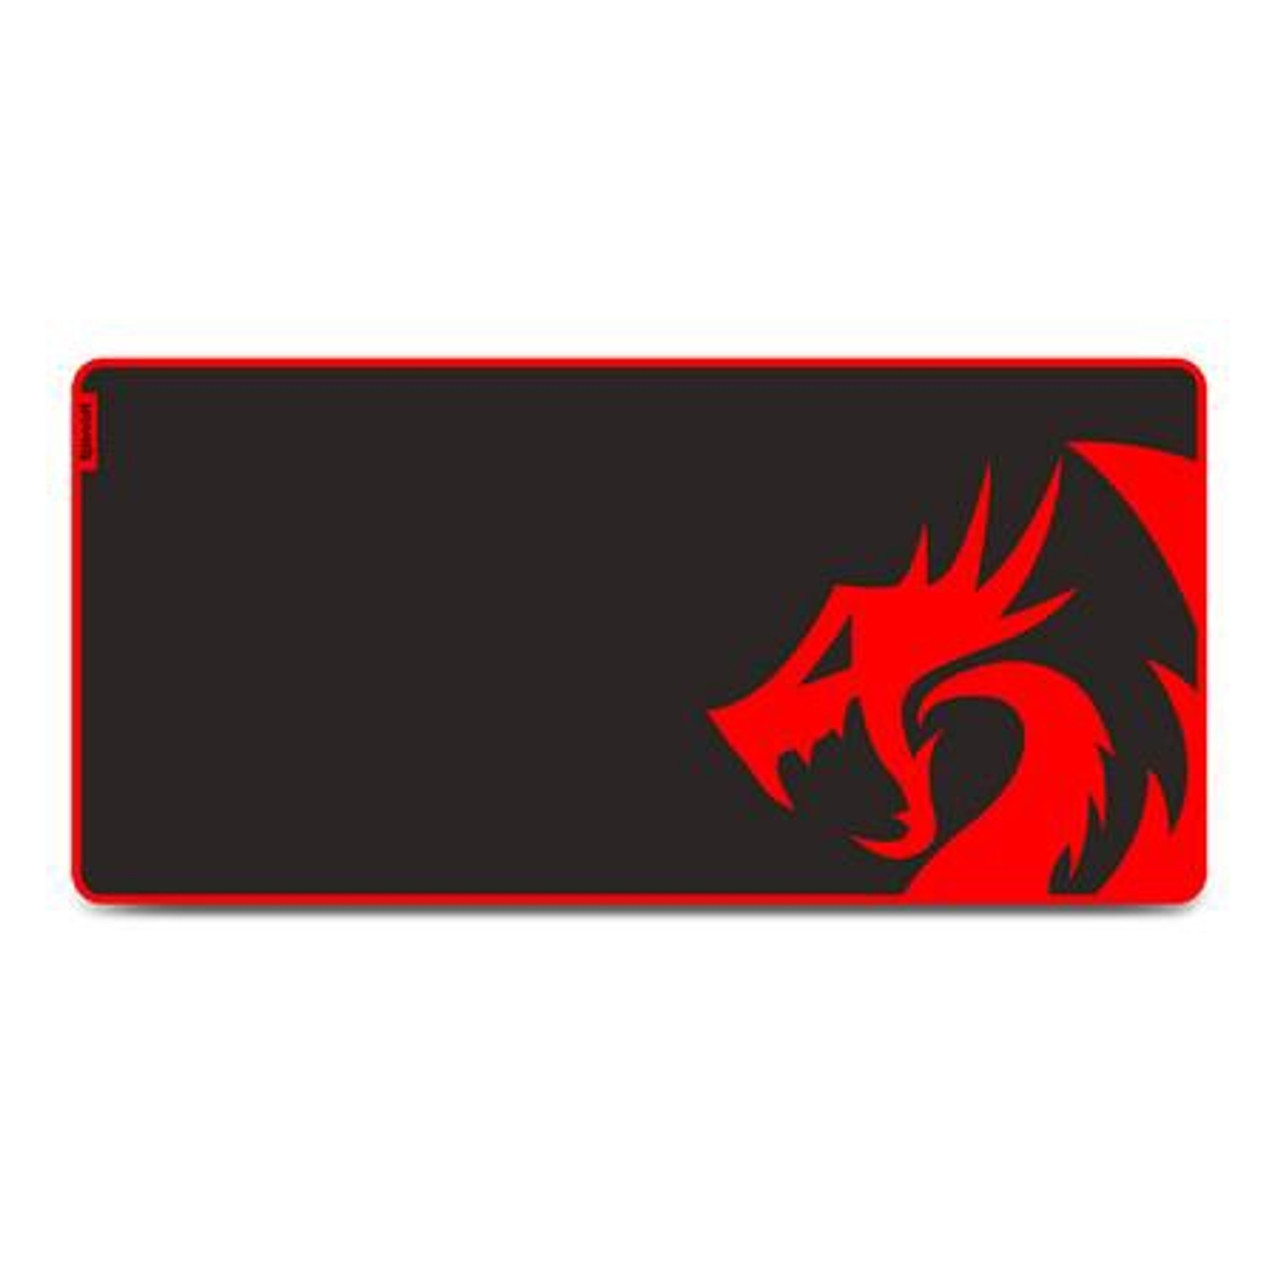 COMPUTER MOUSE PAD RED DRAGON KUNLUN P006A LARGE GAMING - A. Ally & Sons